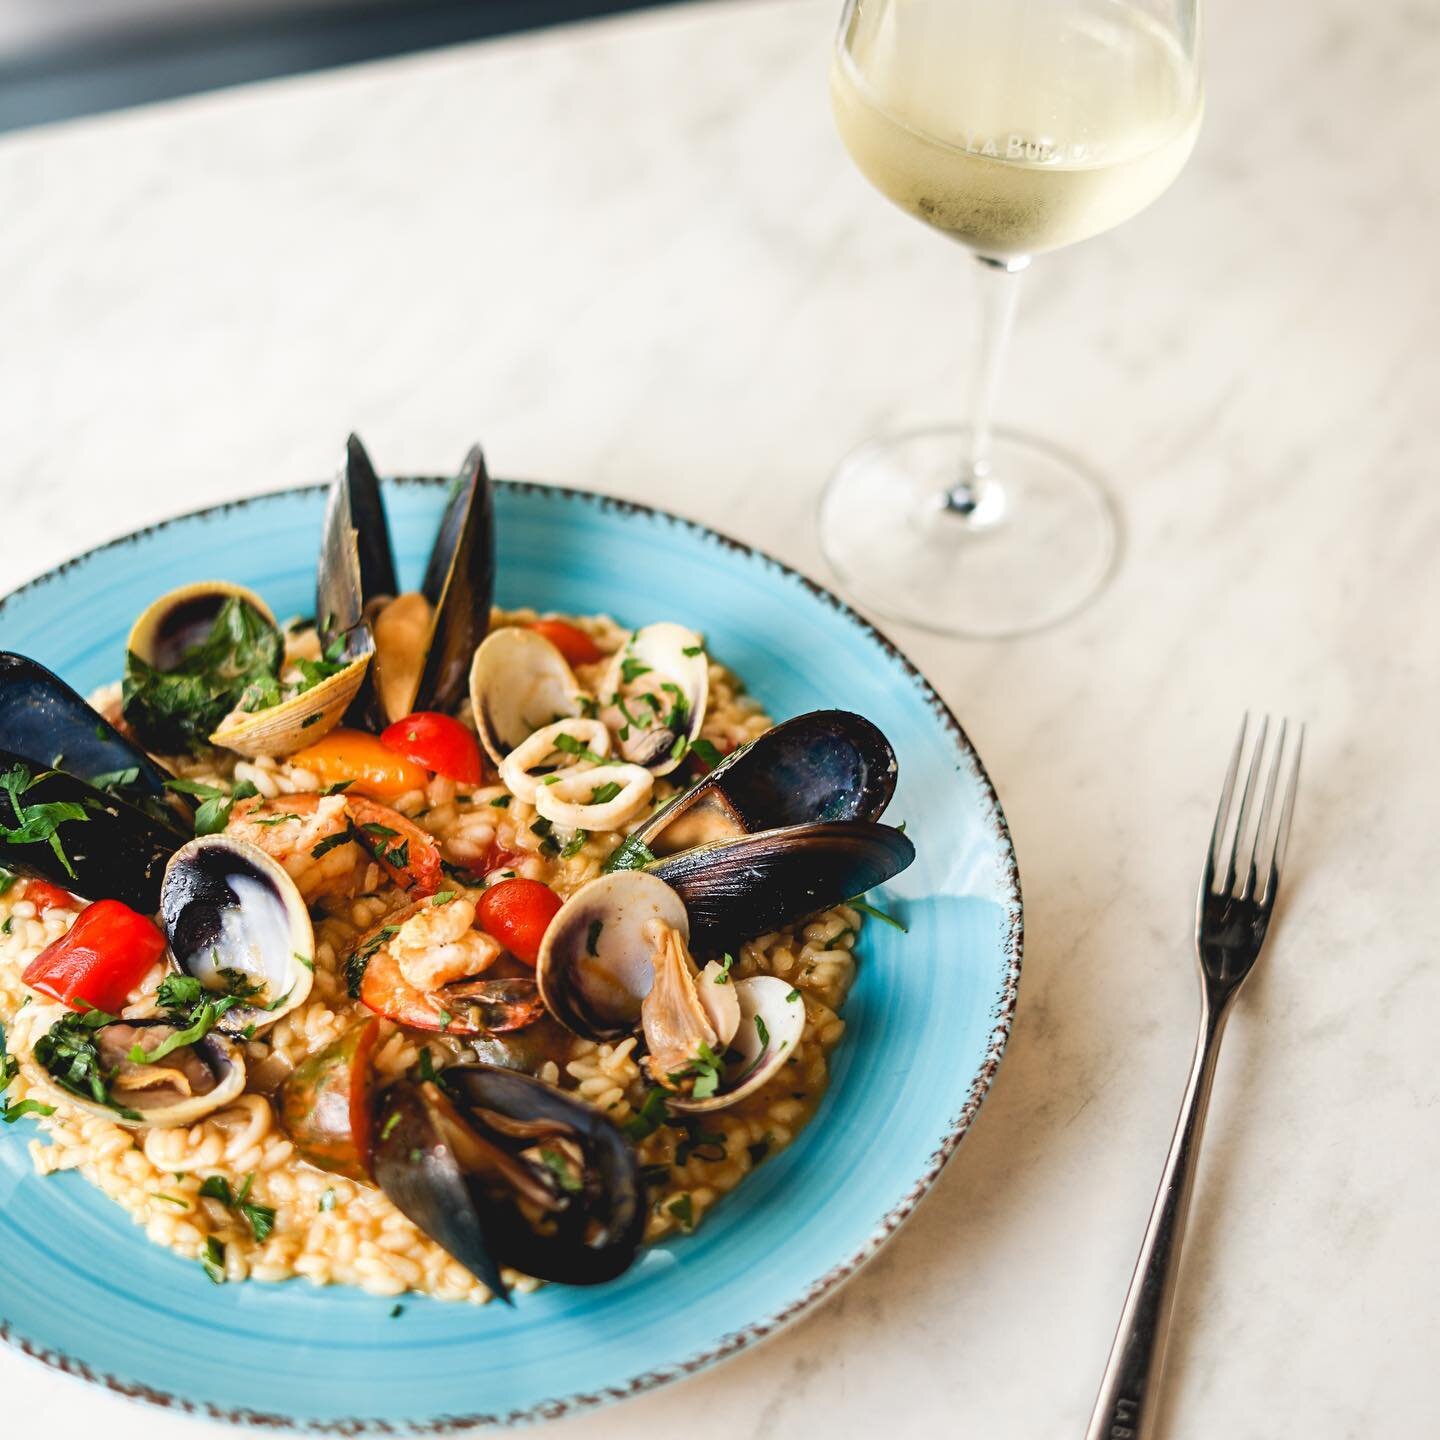 We got something for all the Risotto lovers out there! Presenting our RISOTTO PESCATORA with clams, mussels, prawns and calamari 😍

Available for Feb ONLY, you&rsquo;d hate to miss this one. Get in before it&rsquo;s gone!